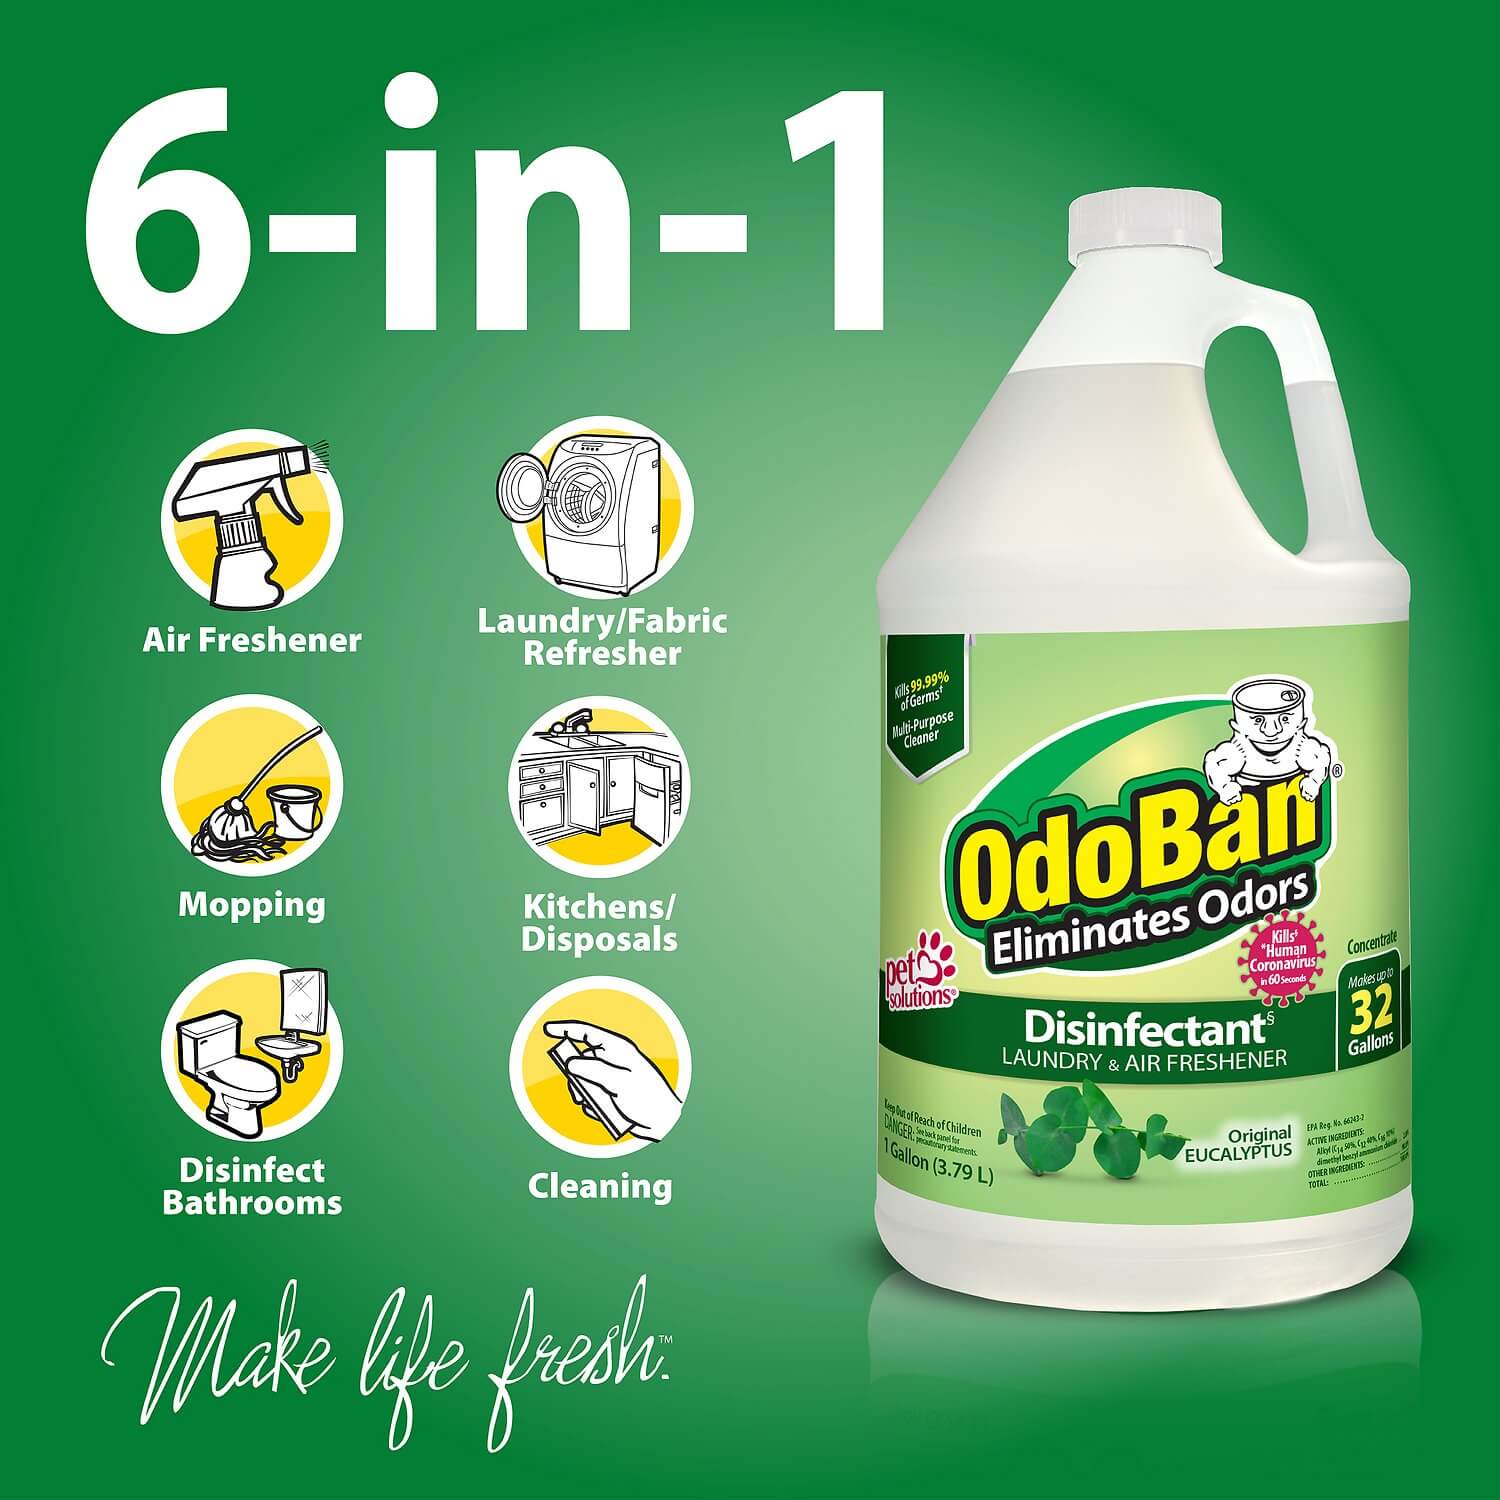 Best8-Cat-Urine-Enzyme-Laundry-Detergents OdoBan-Disinfectant-Laundry-&-Air-Freshener-Concentrate-Eucalyptus–Scent